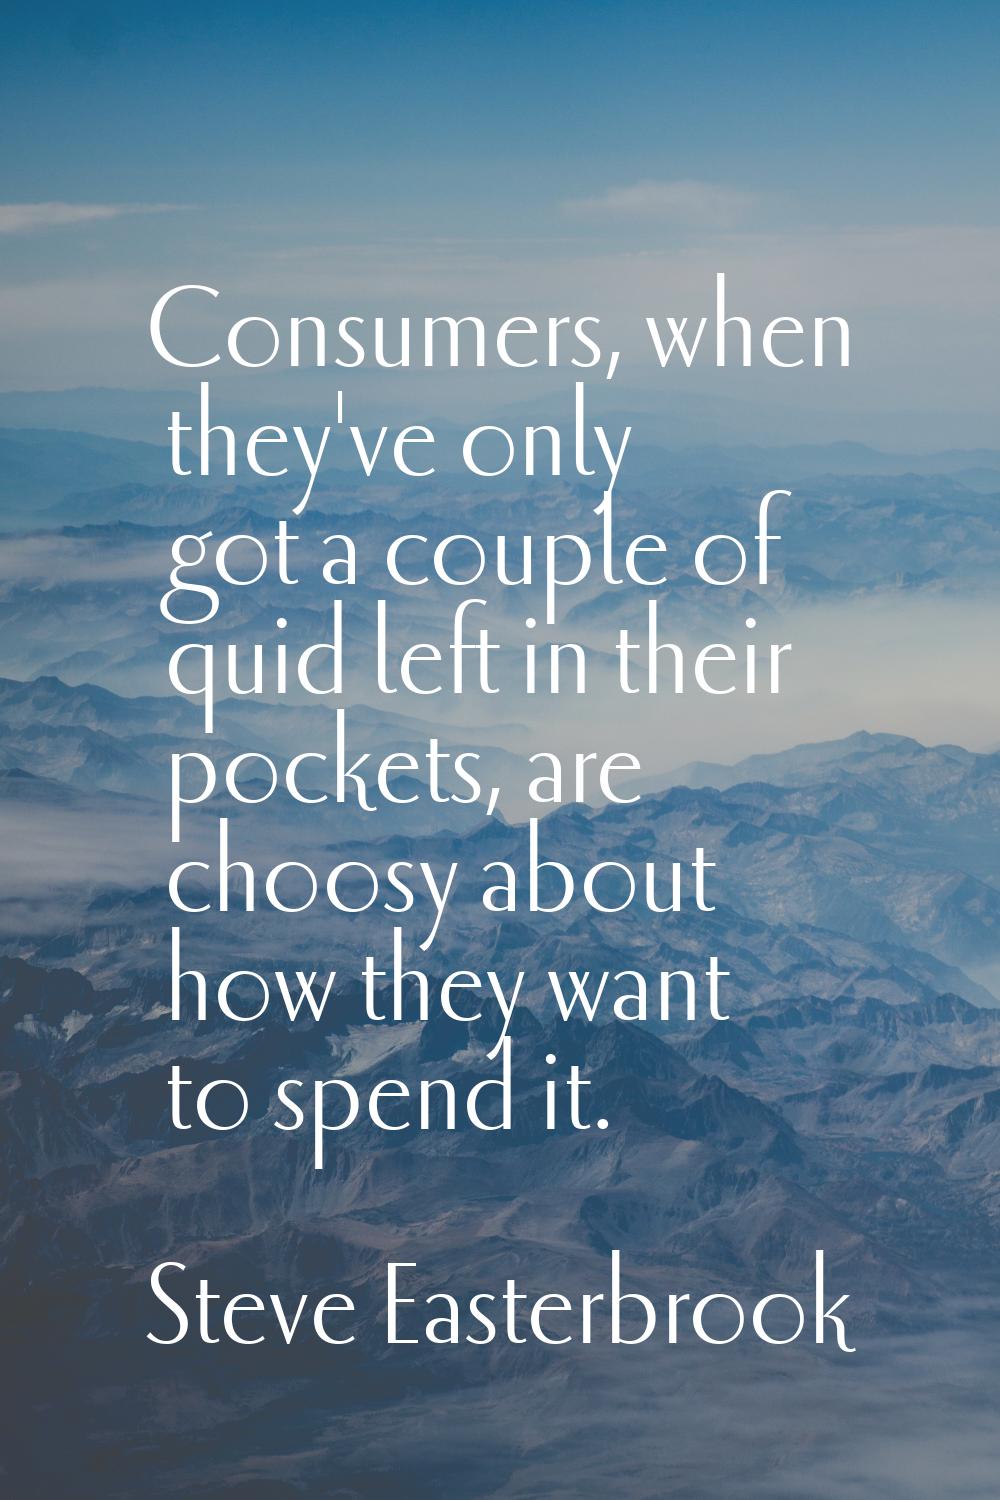 Consumers, when they've only got a couple of quid left in their pockets, are choosy about how they 